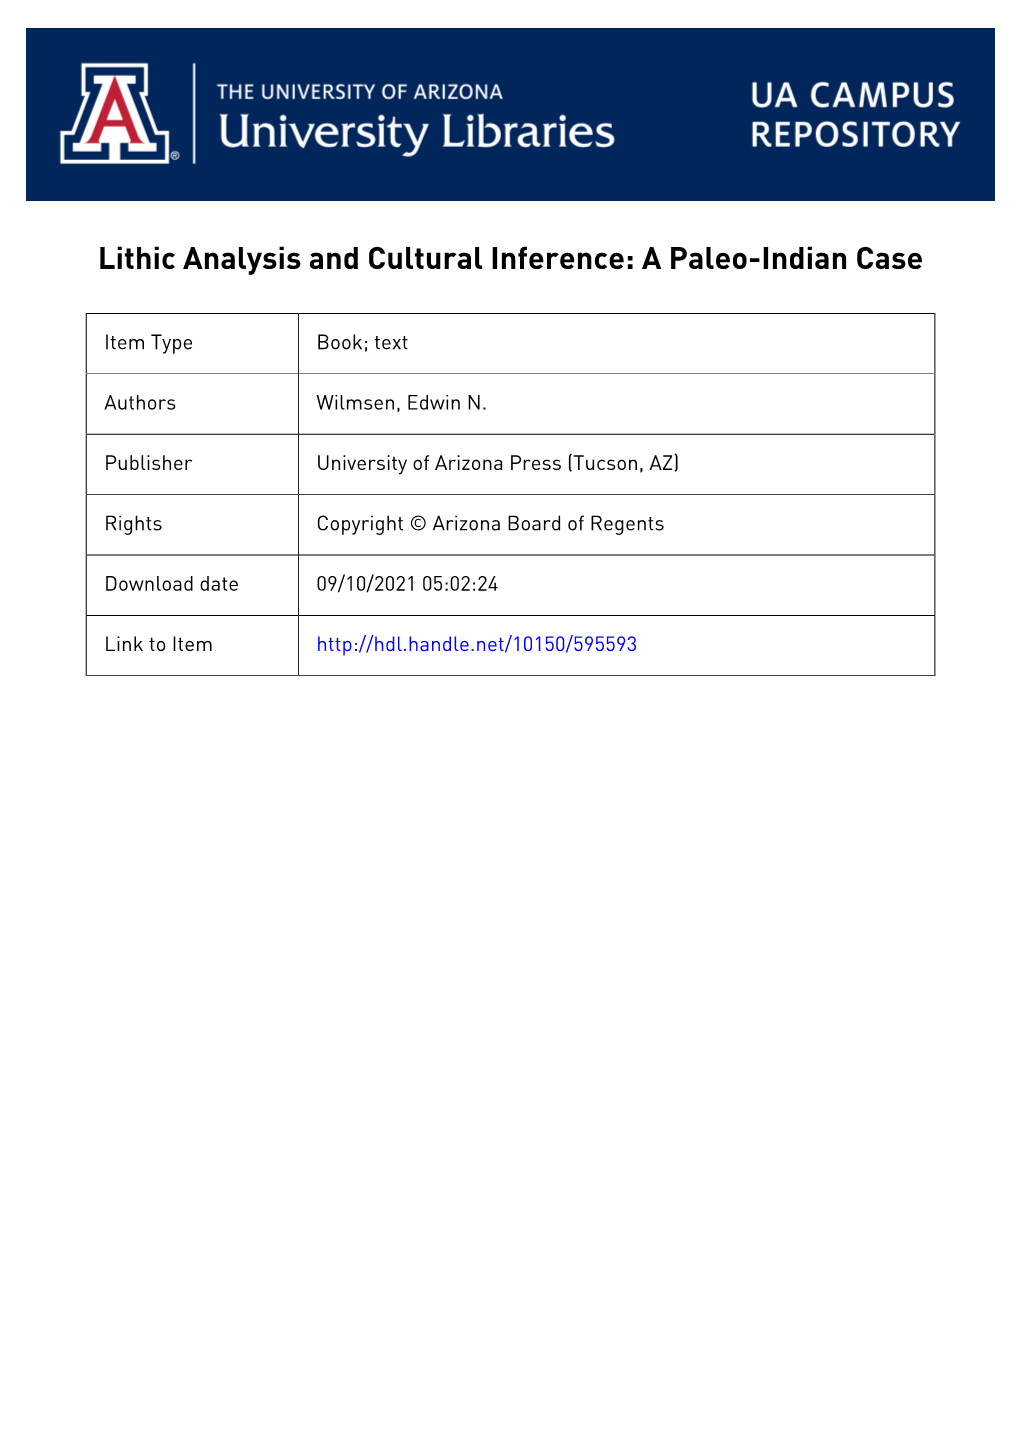 Lithic Analysis and Cultural Inference: a Paleo-Indian Case